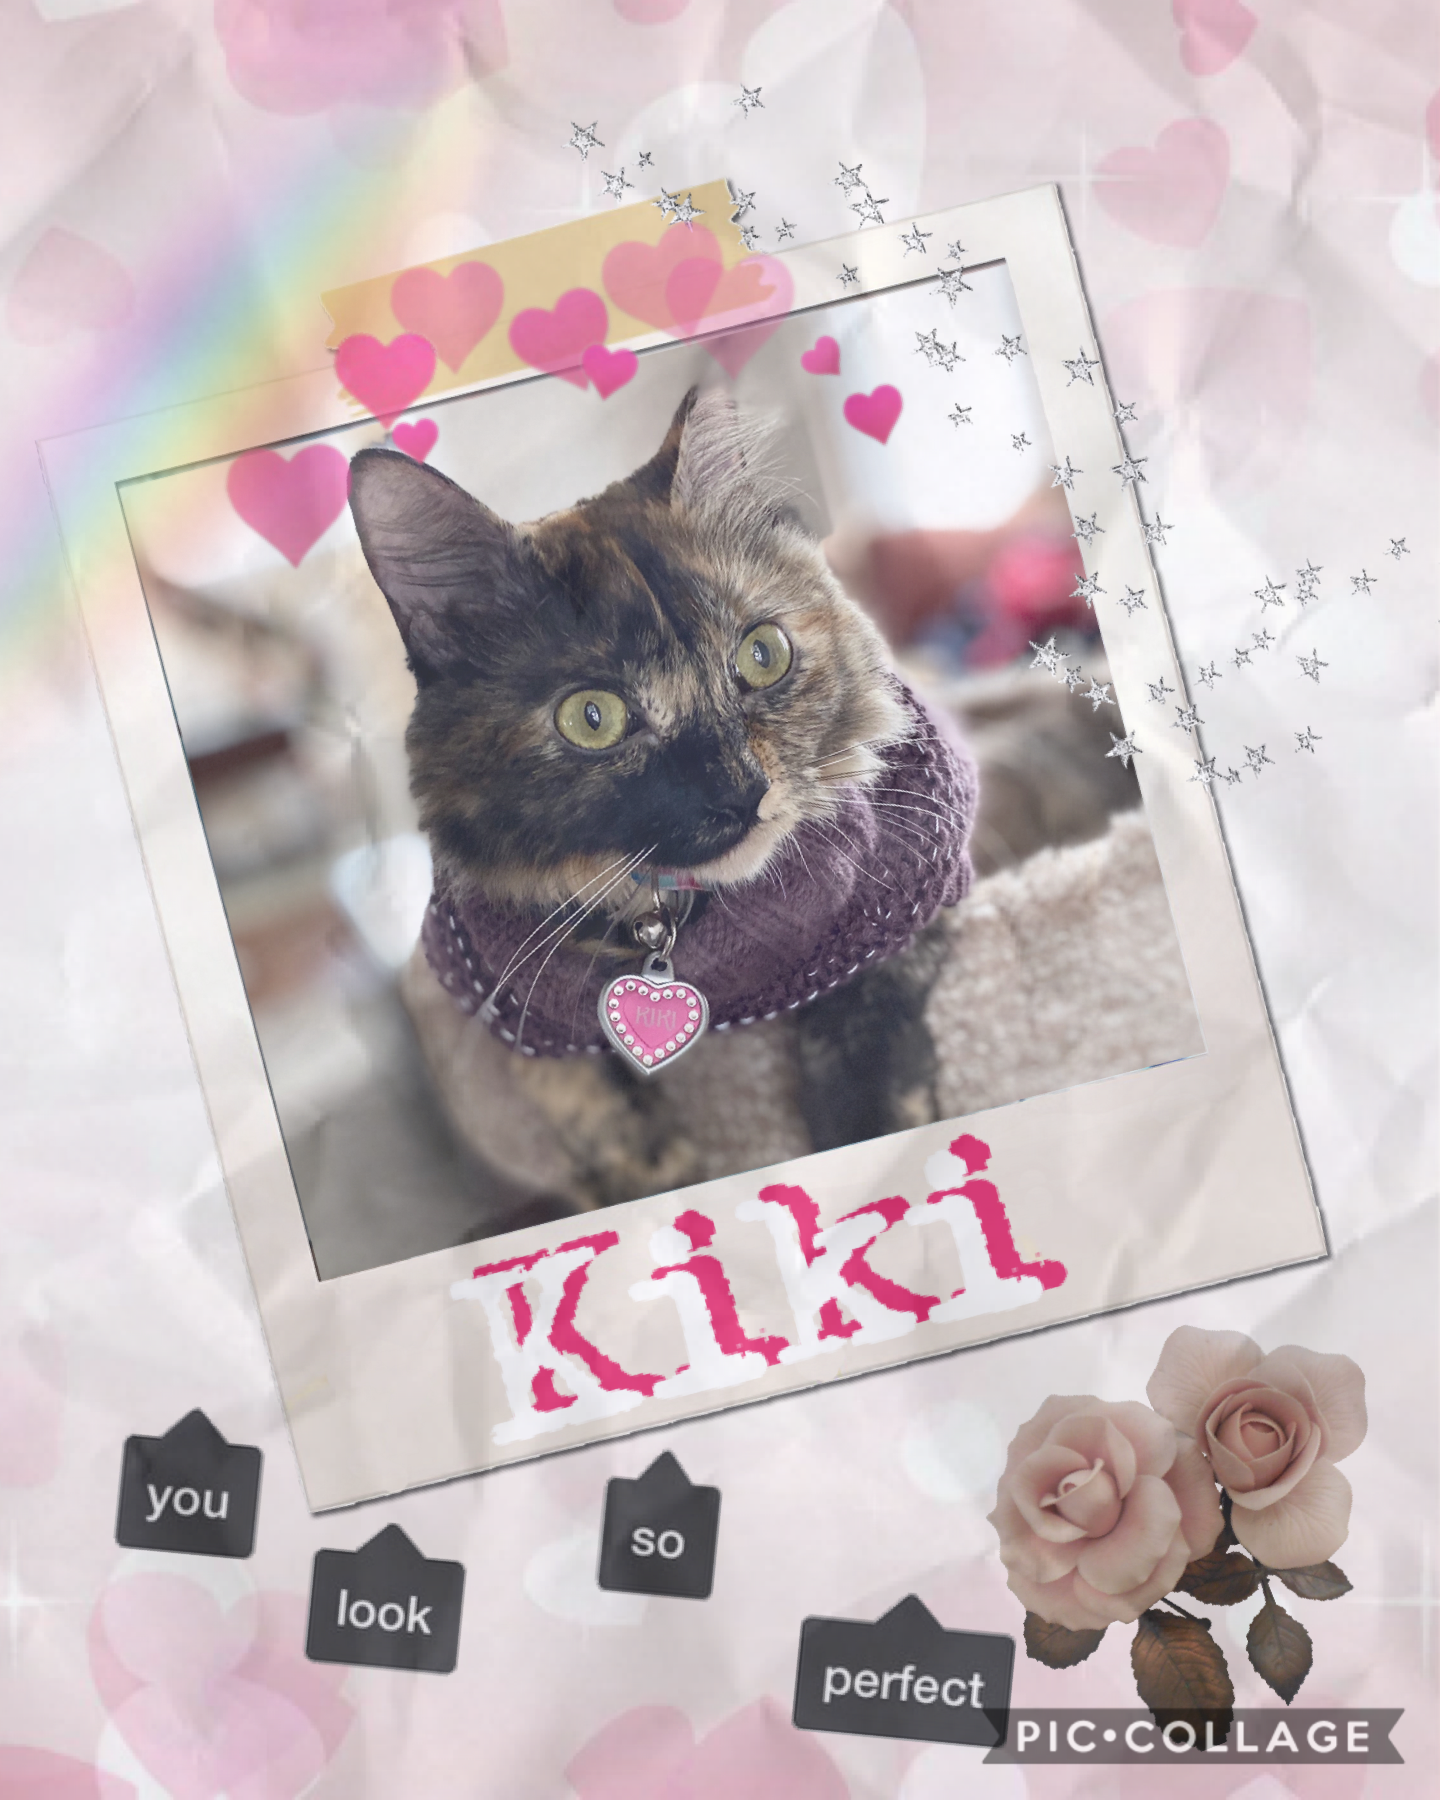 HI GUYS MEET MY CAT KIKI J AM SOOOOOO HAPPY YOU FINALLY GET TO SEE HER!!!!! Sorry in haven’t posted in a LOOOOONG time I am trying my best to do school work and PicCollage so I came up with a solution during the week I focus on school work but on the week